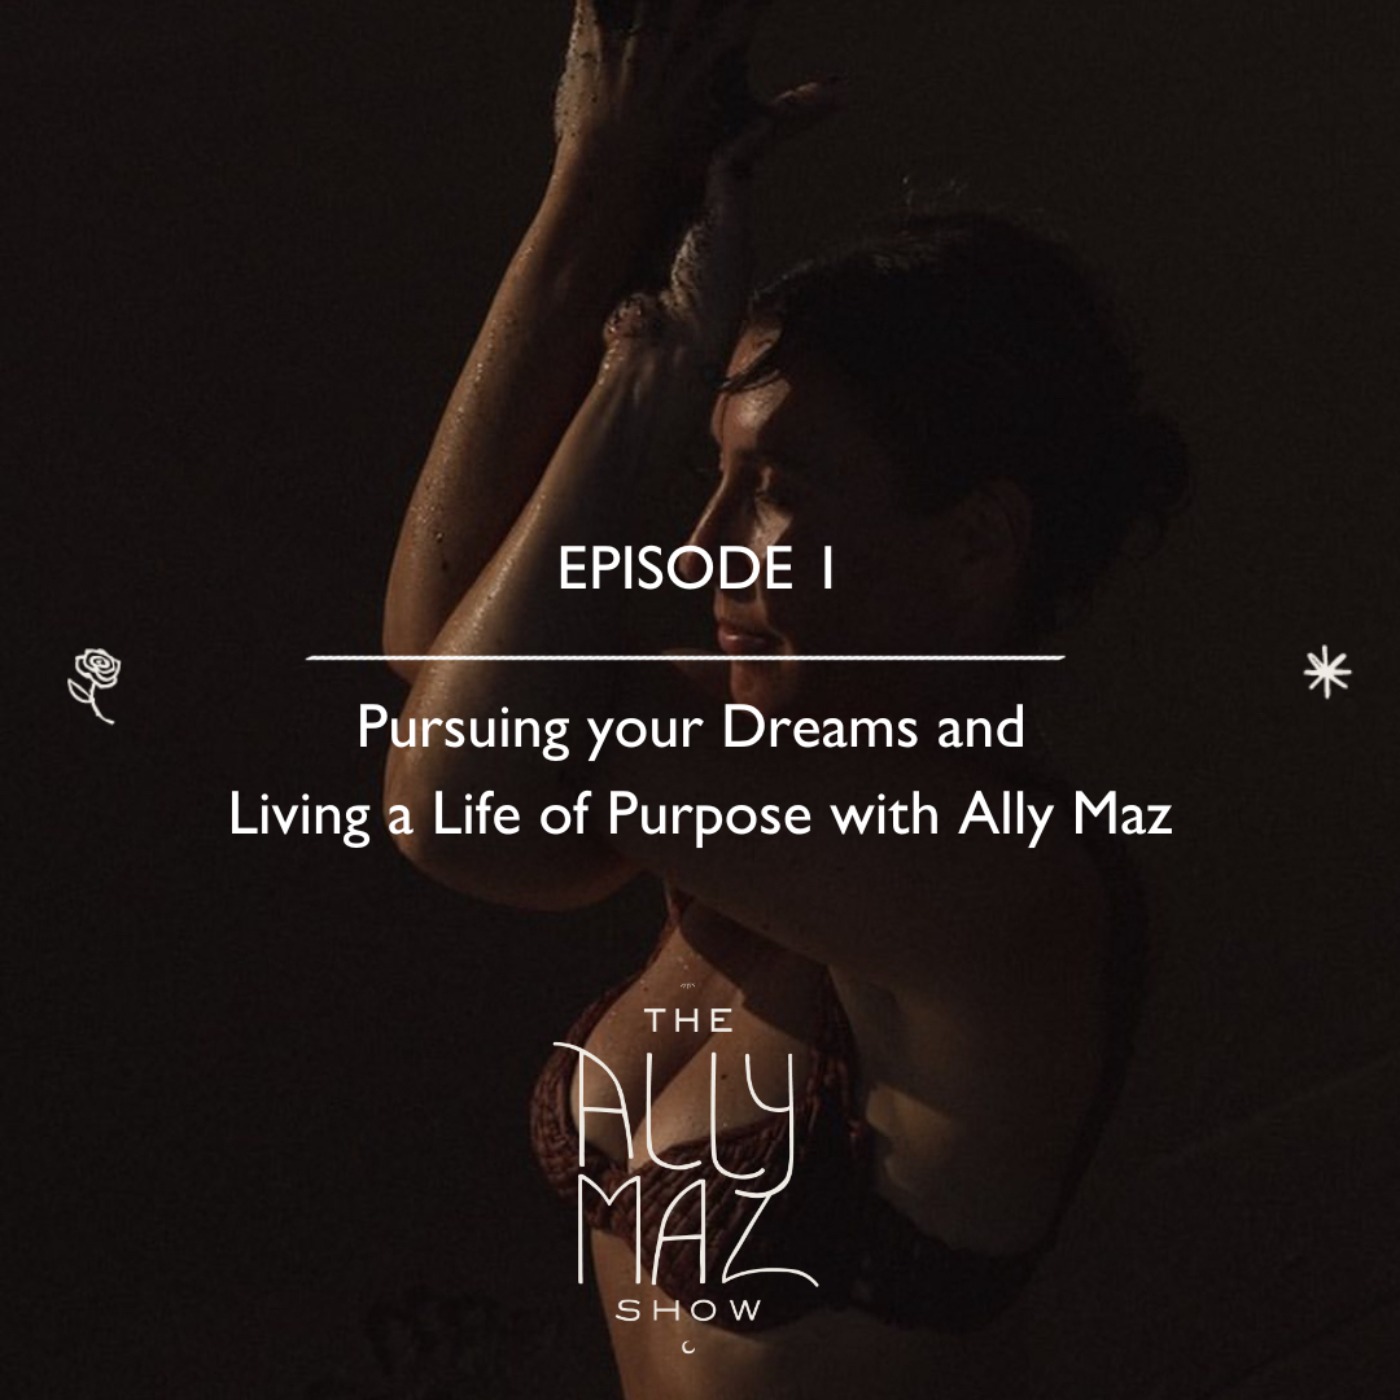 Pursuing Your Dreams and Living a Life of Purpose with Ally Maz